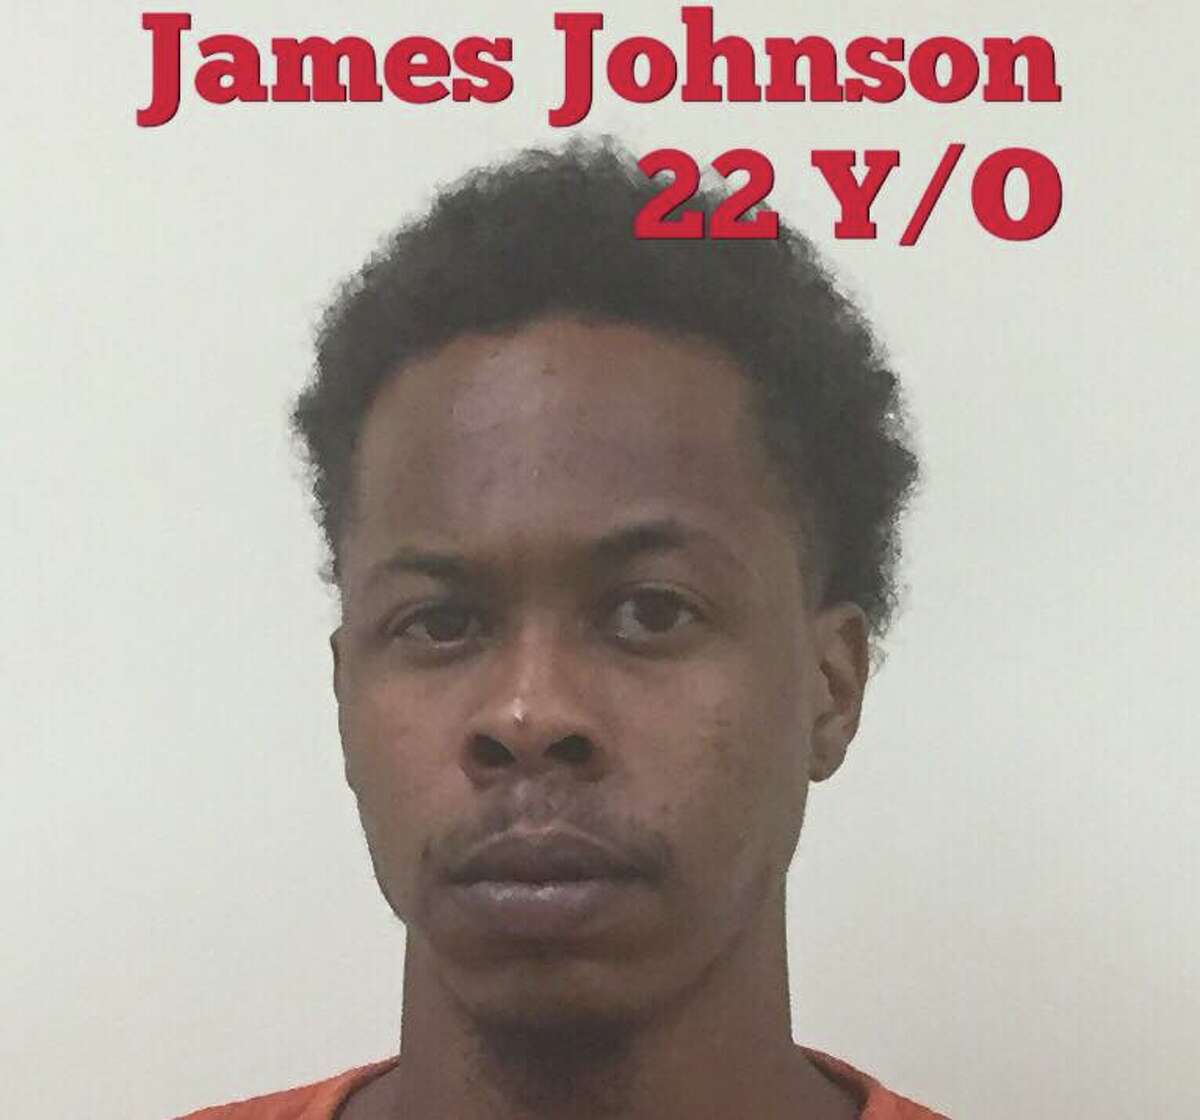 James DeAngelo Johnson, 22, now faces a charge of murder in the death of 24-year-old Isiah Roper.